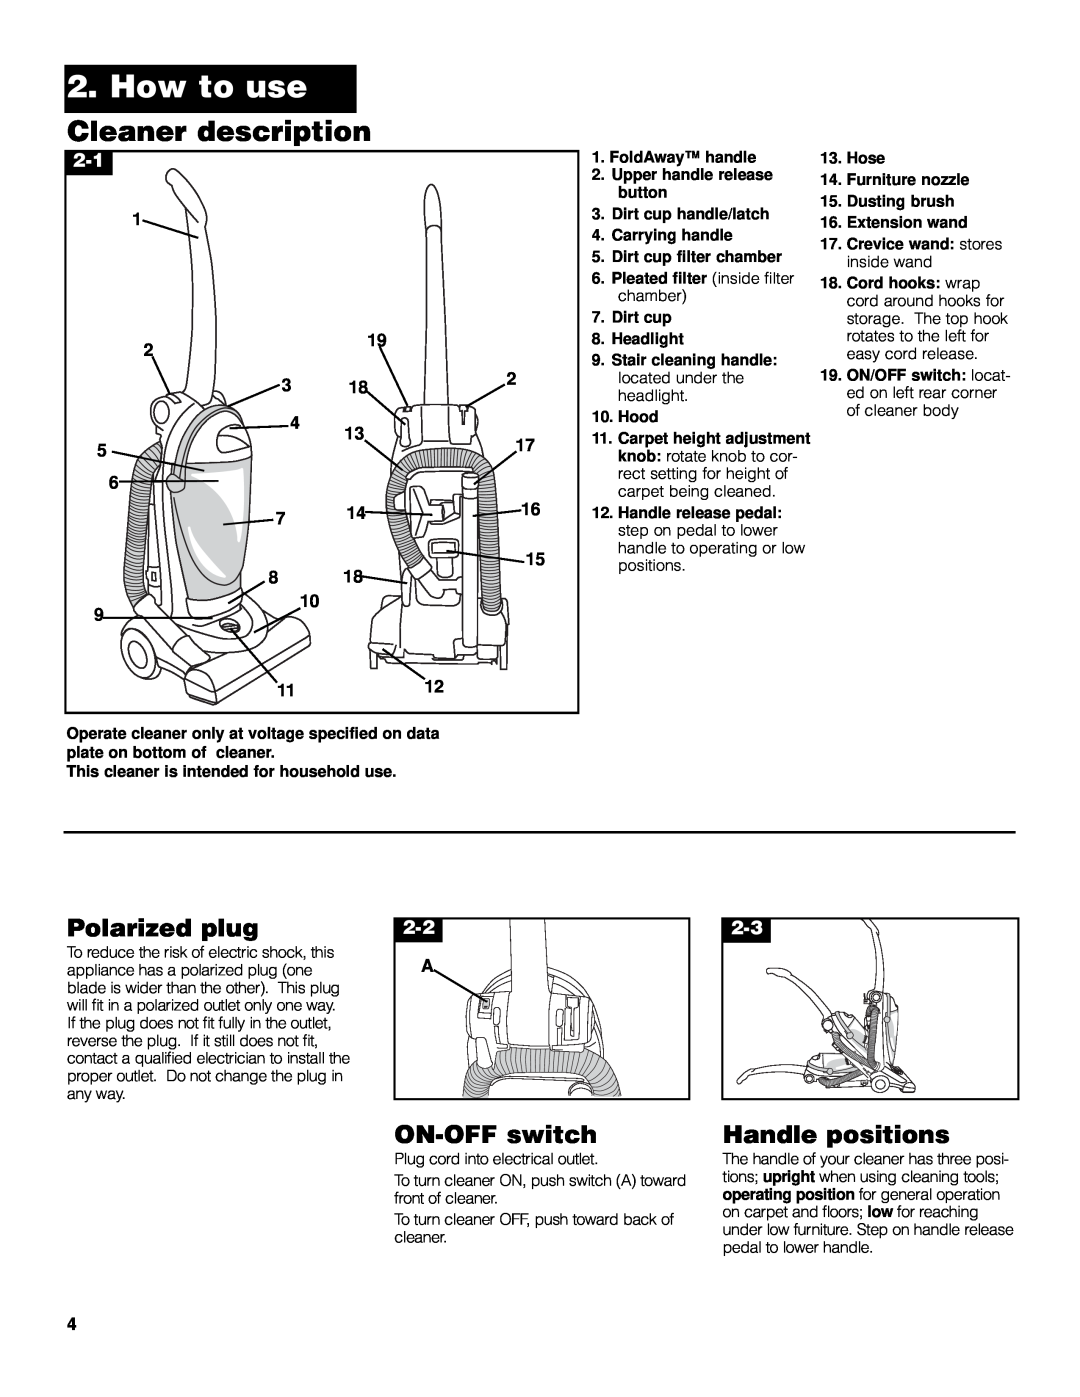 Hoover FoldAwayTM Upright owner manual How to use, Cleaner description, Polarized plug, ON-OFF switch, Handle positions 